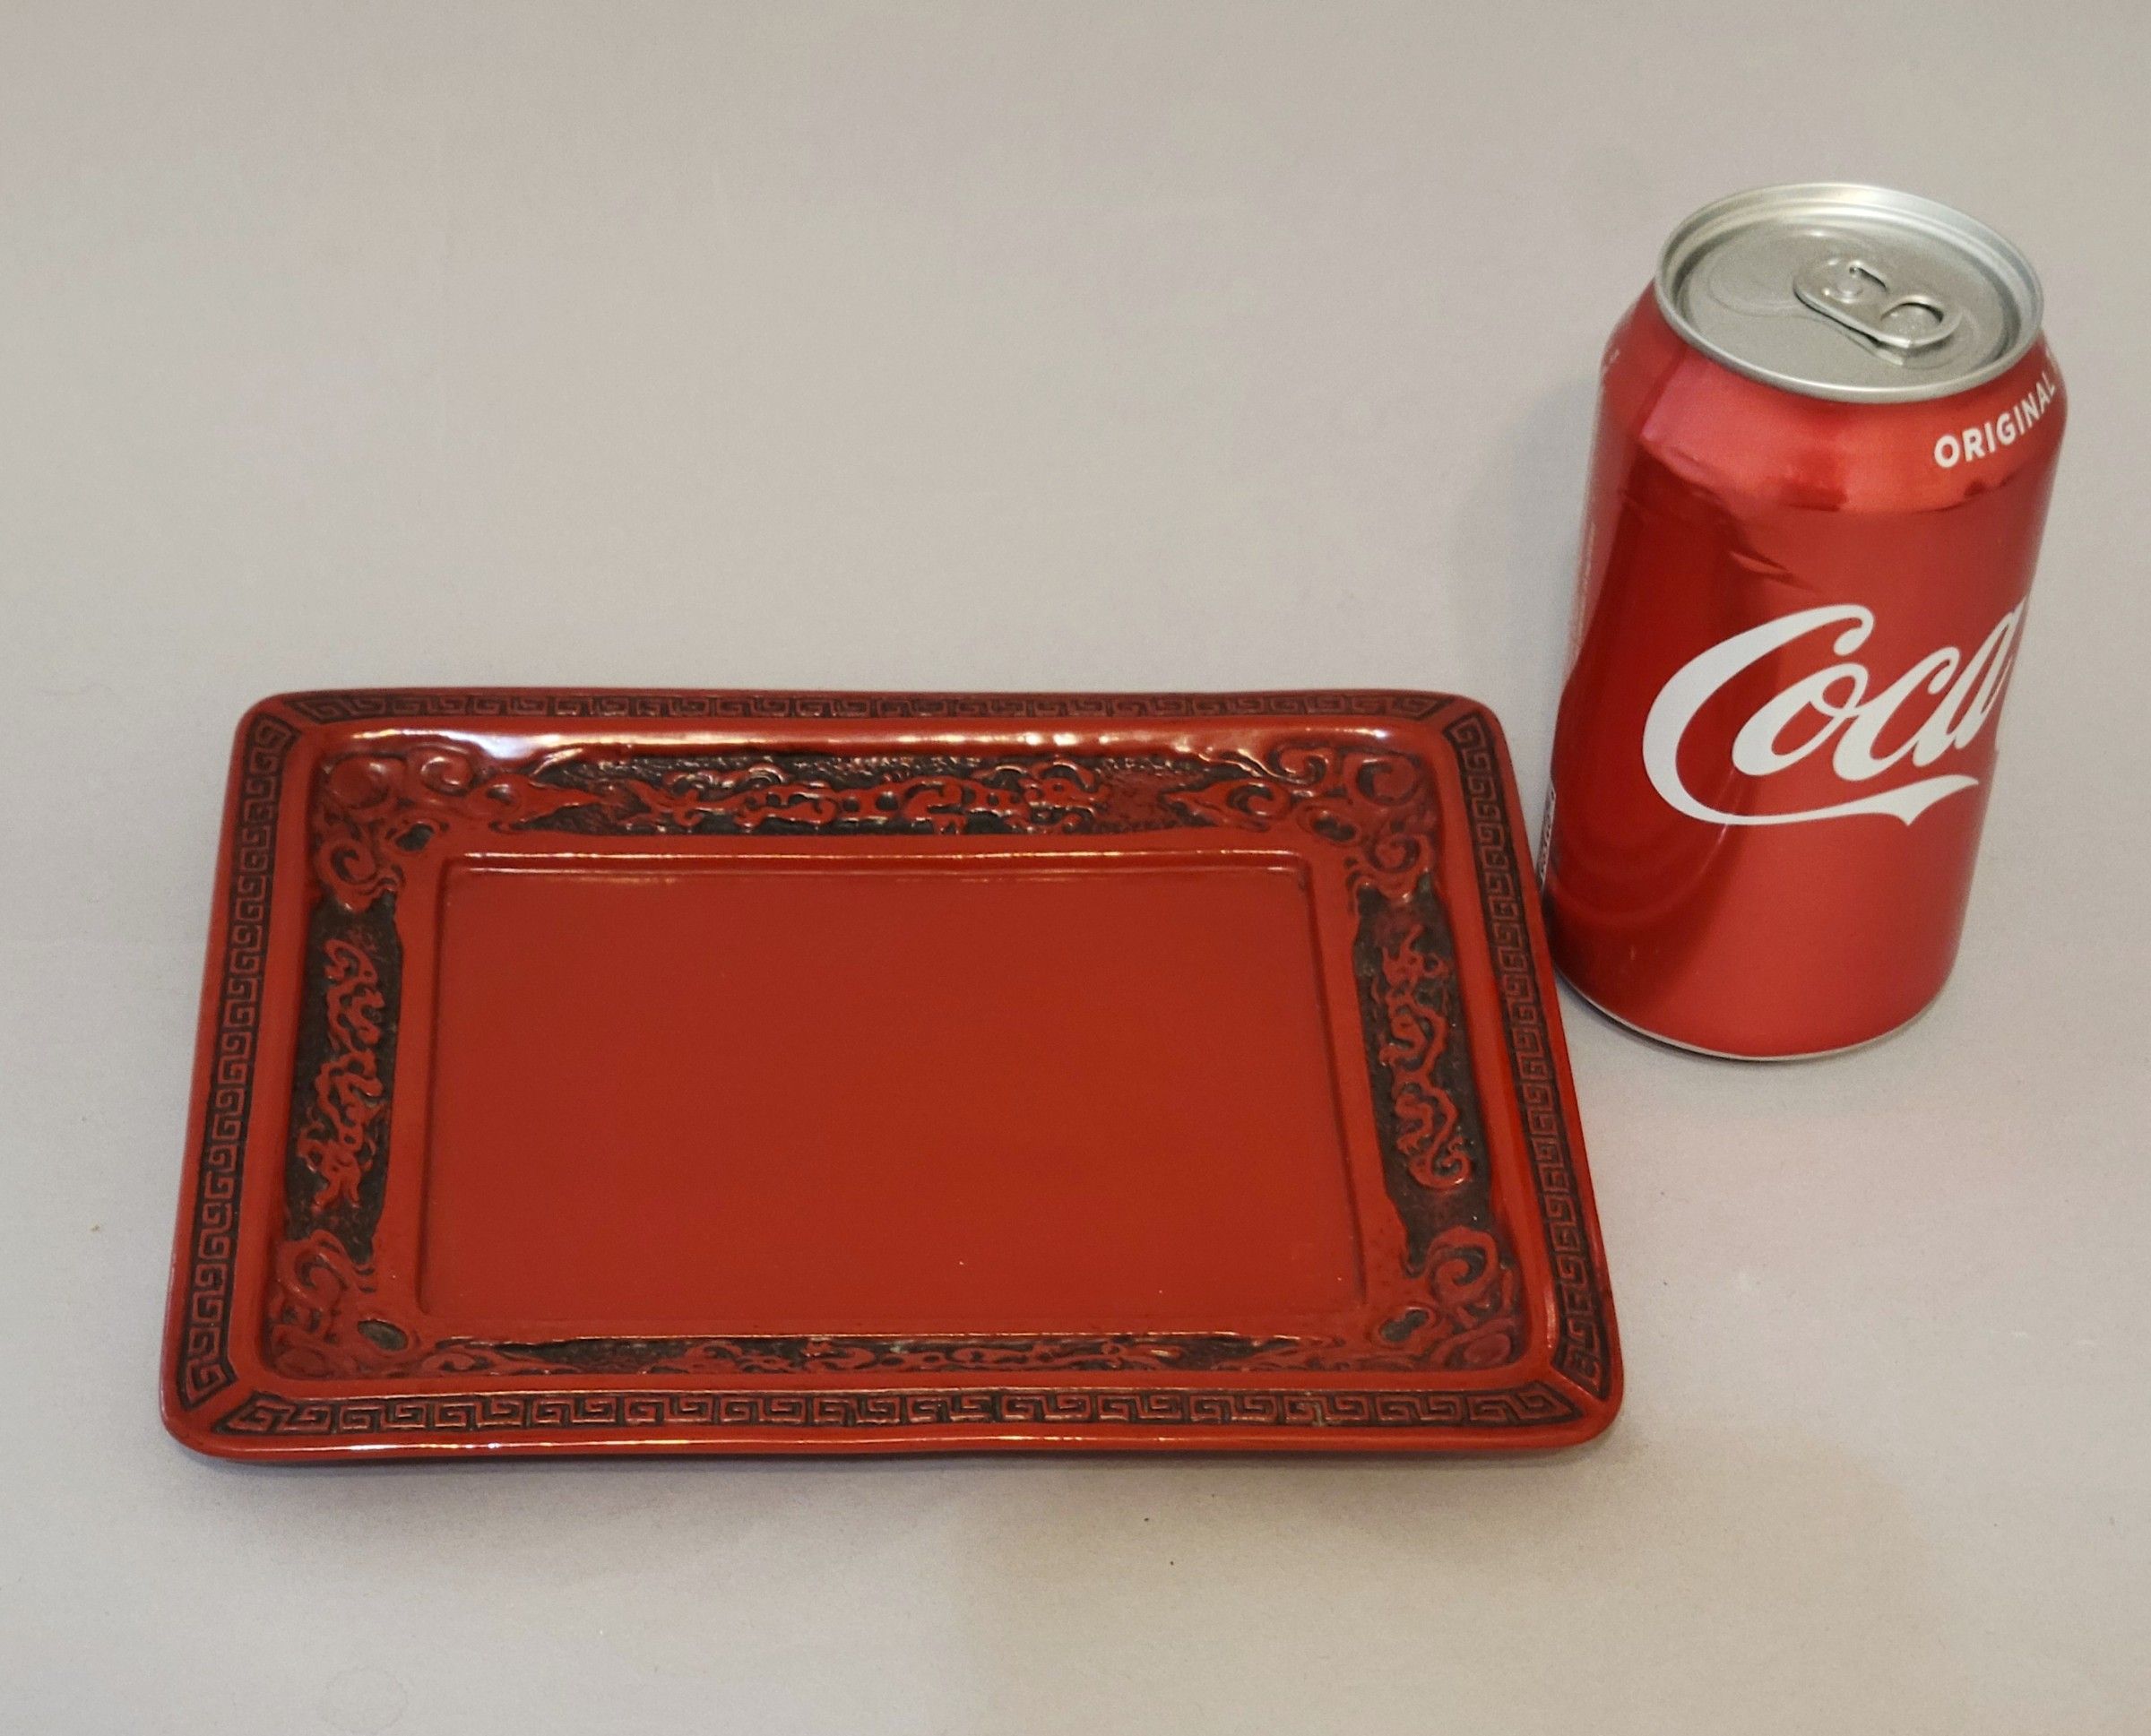 Antique Japanese Red Lacquer Tray, Taisho